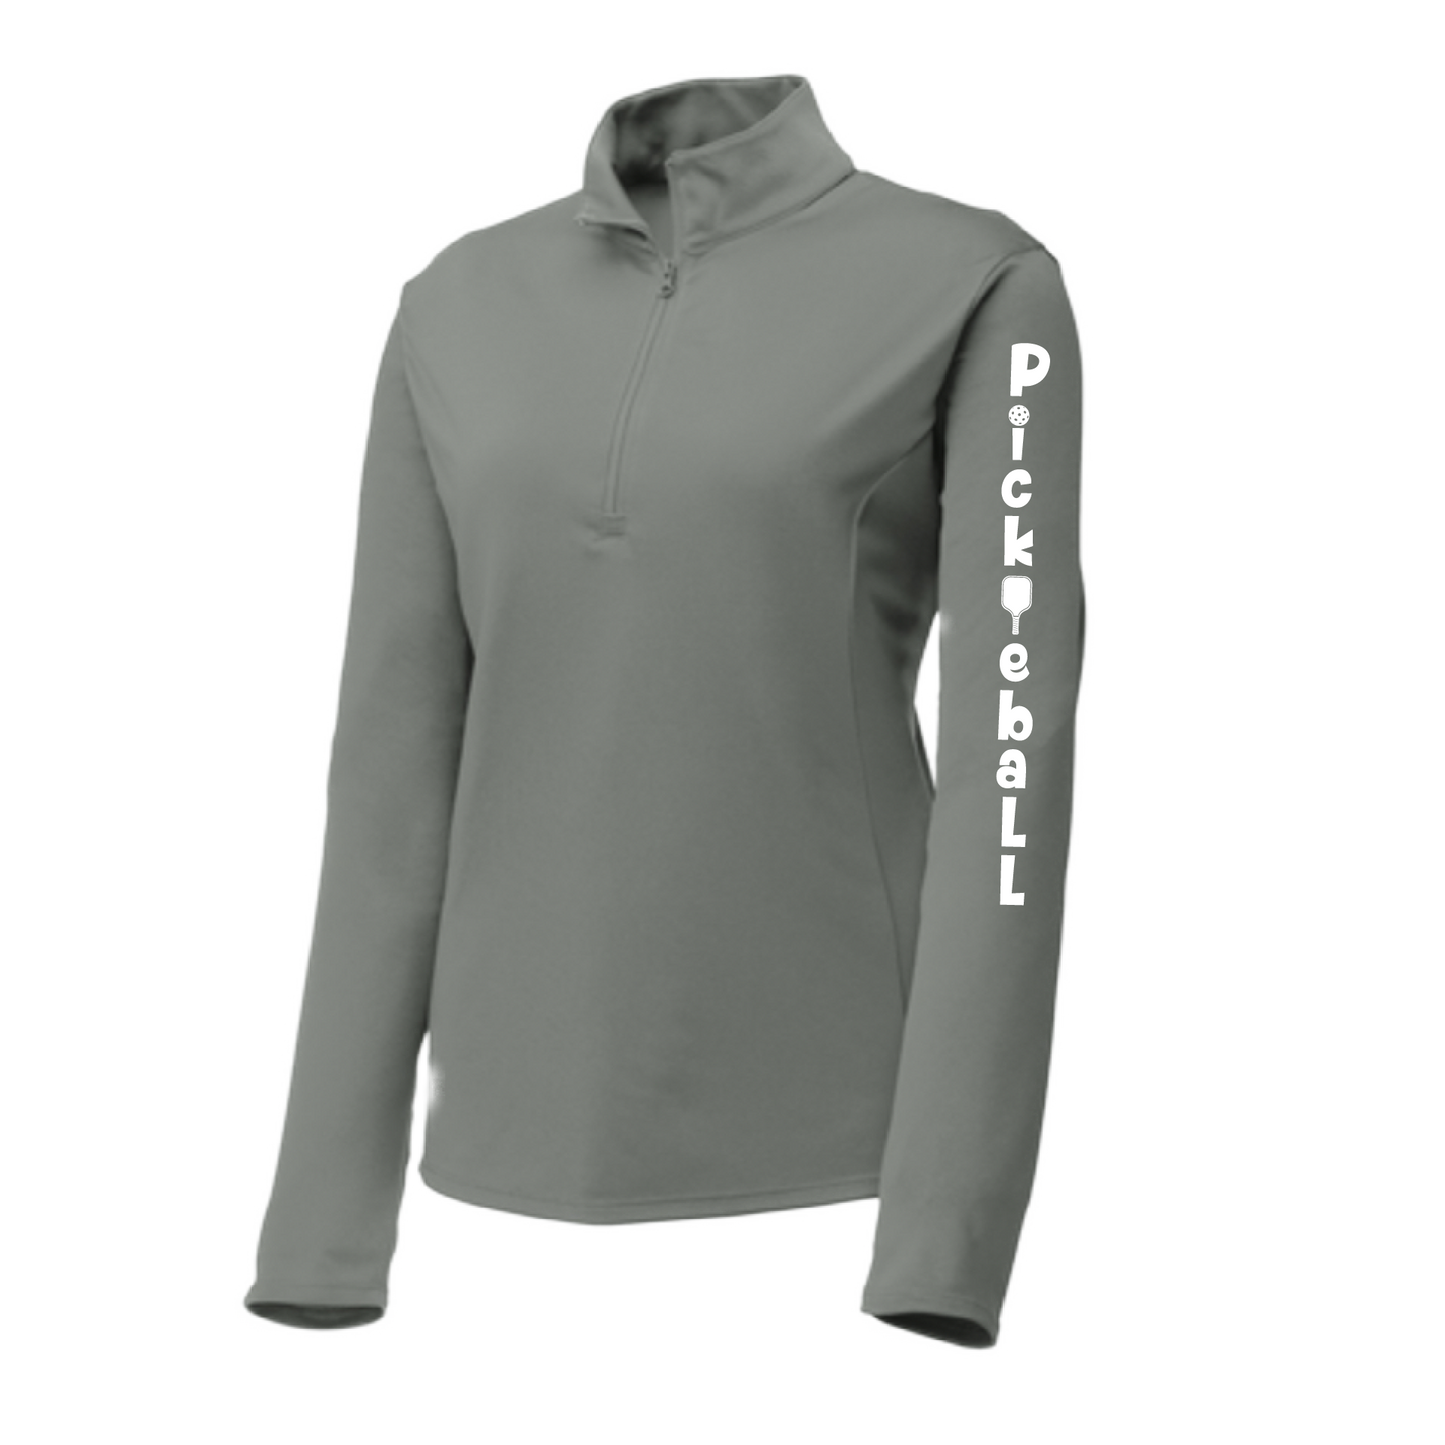 Design: Pickleball (Vertical) Customizable Location  Women's 1/4-Zip Pullover: Princess seams and drop tail hem.  Turn up the volume in this Women's shirt with its perfect mix of softness and attitude. Material is ultra-comfortable with moisture wicking properties and tri-blend softness. PosiCharge technology locks in color. Highly breathable and lightweight. Versatile enough for wearing year-round.